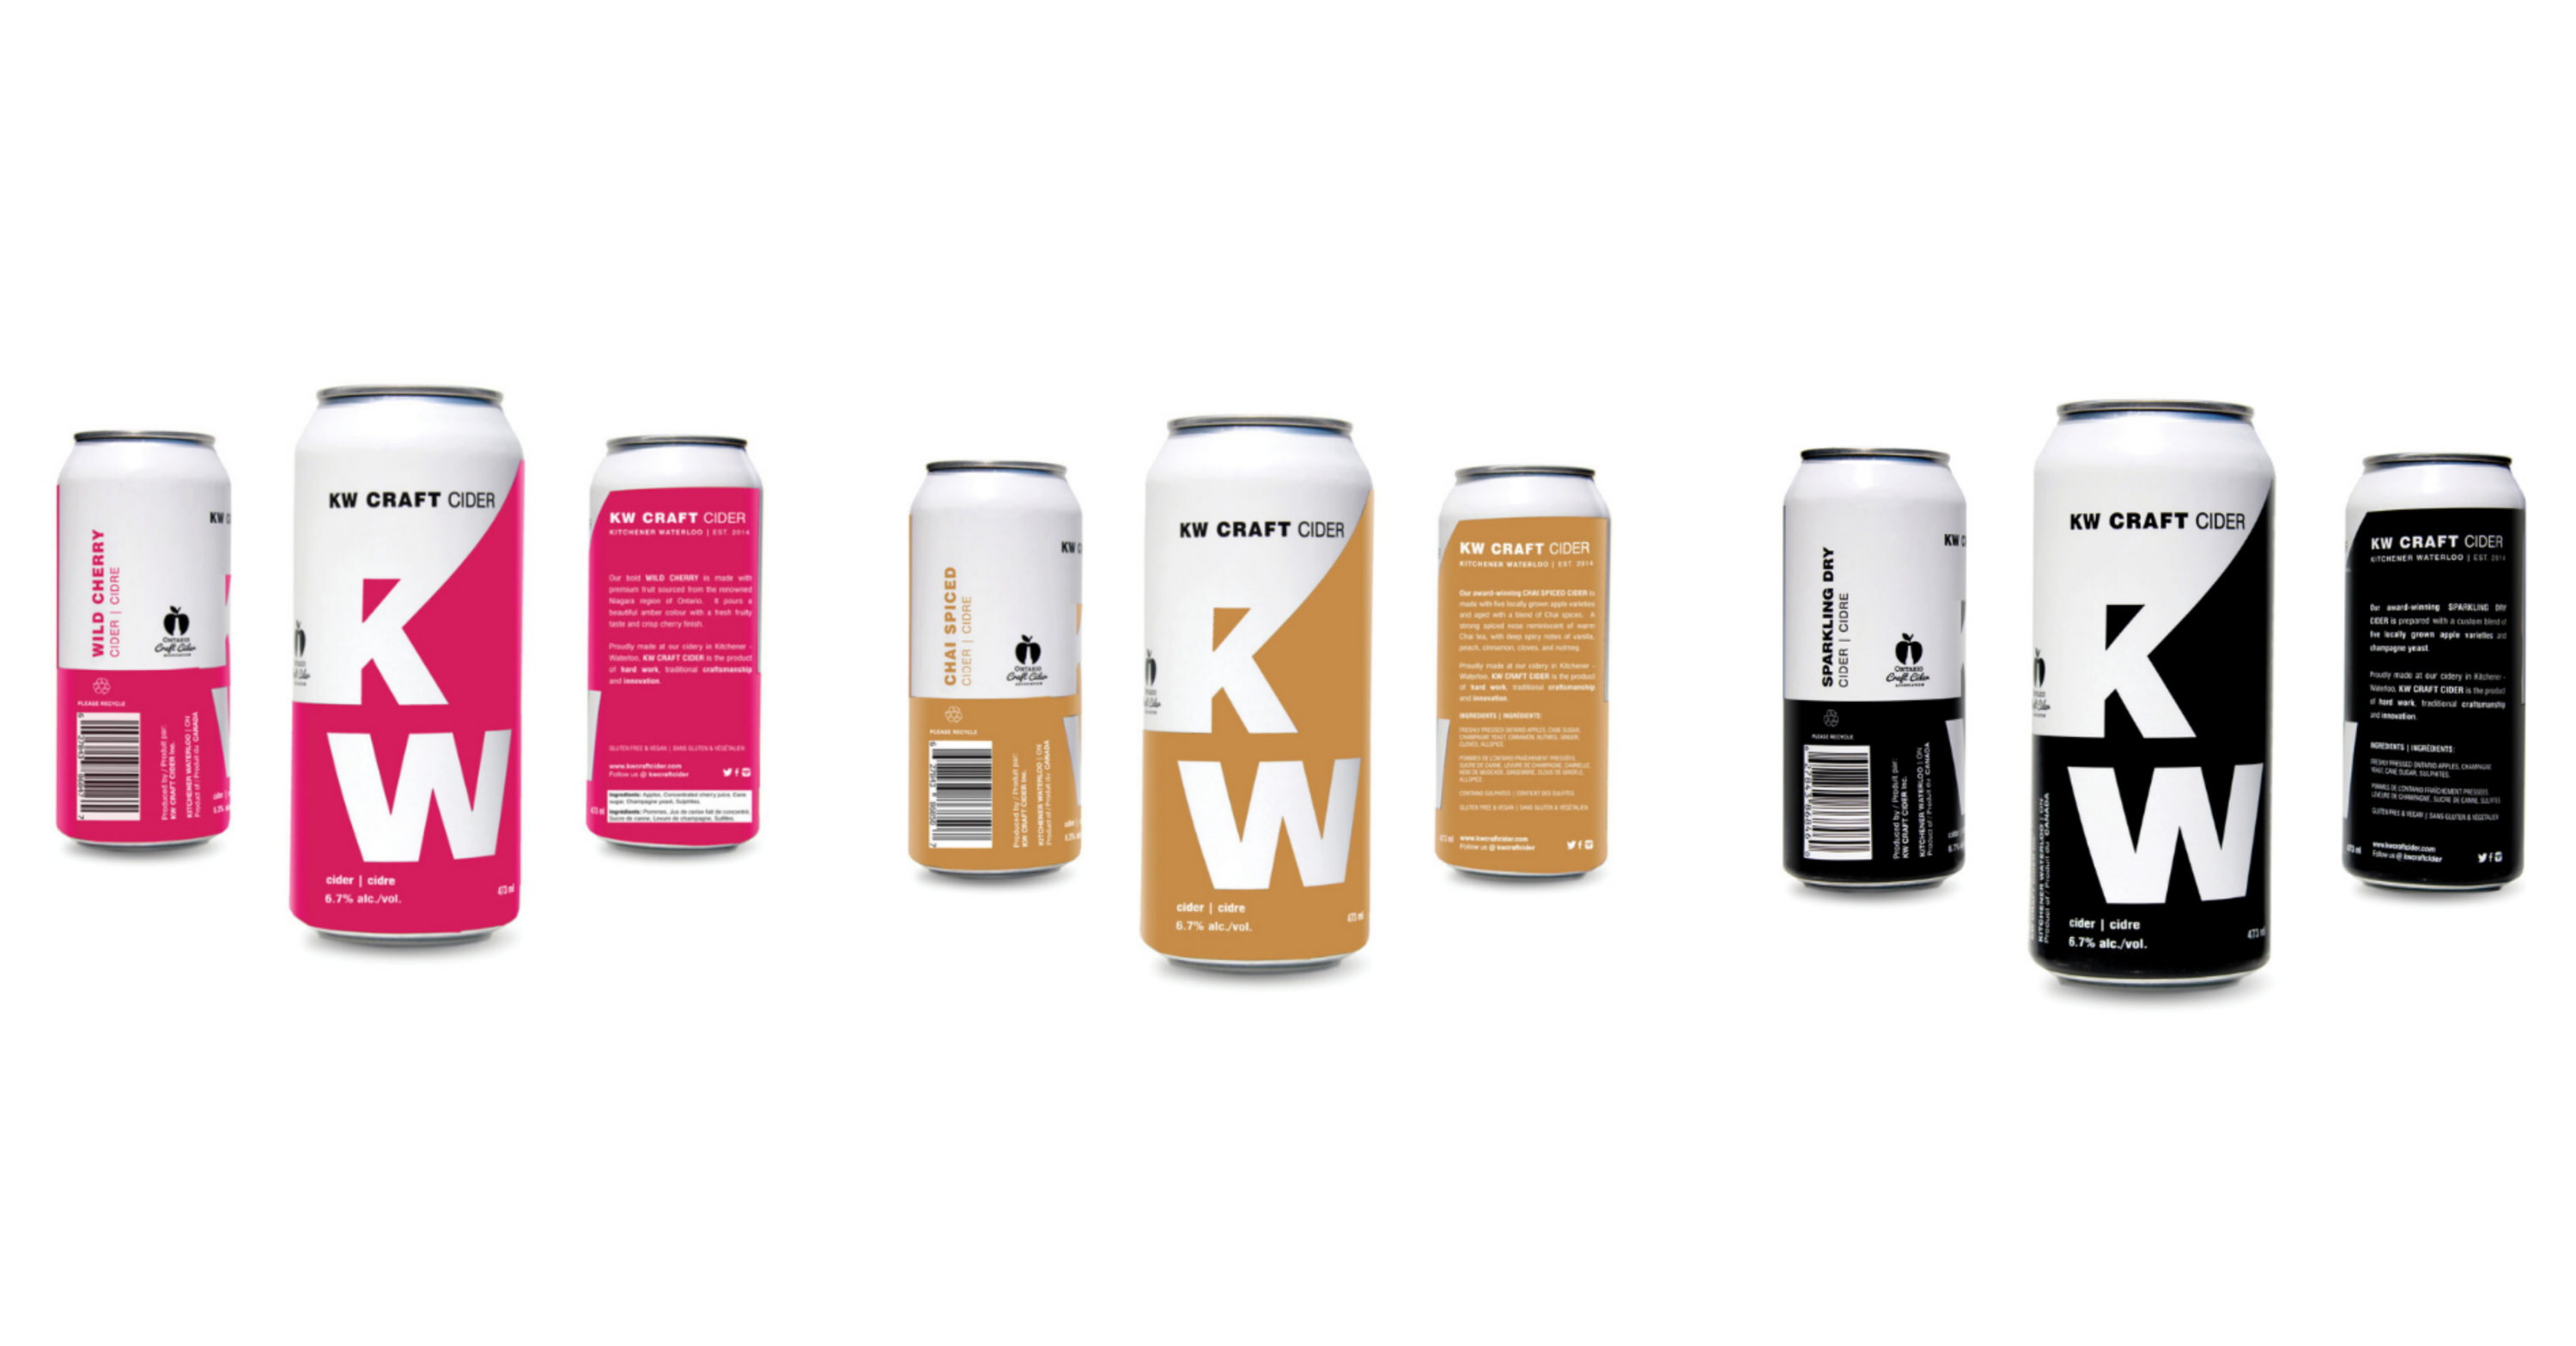 KW Craft Cider cans in different cider flavours